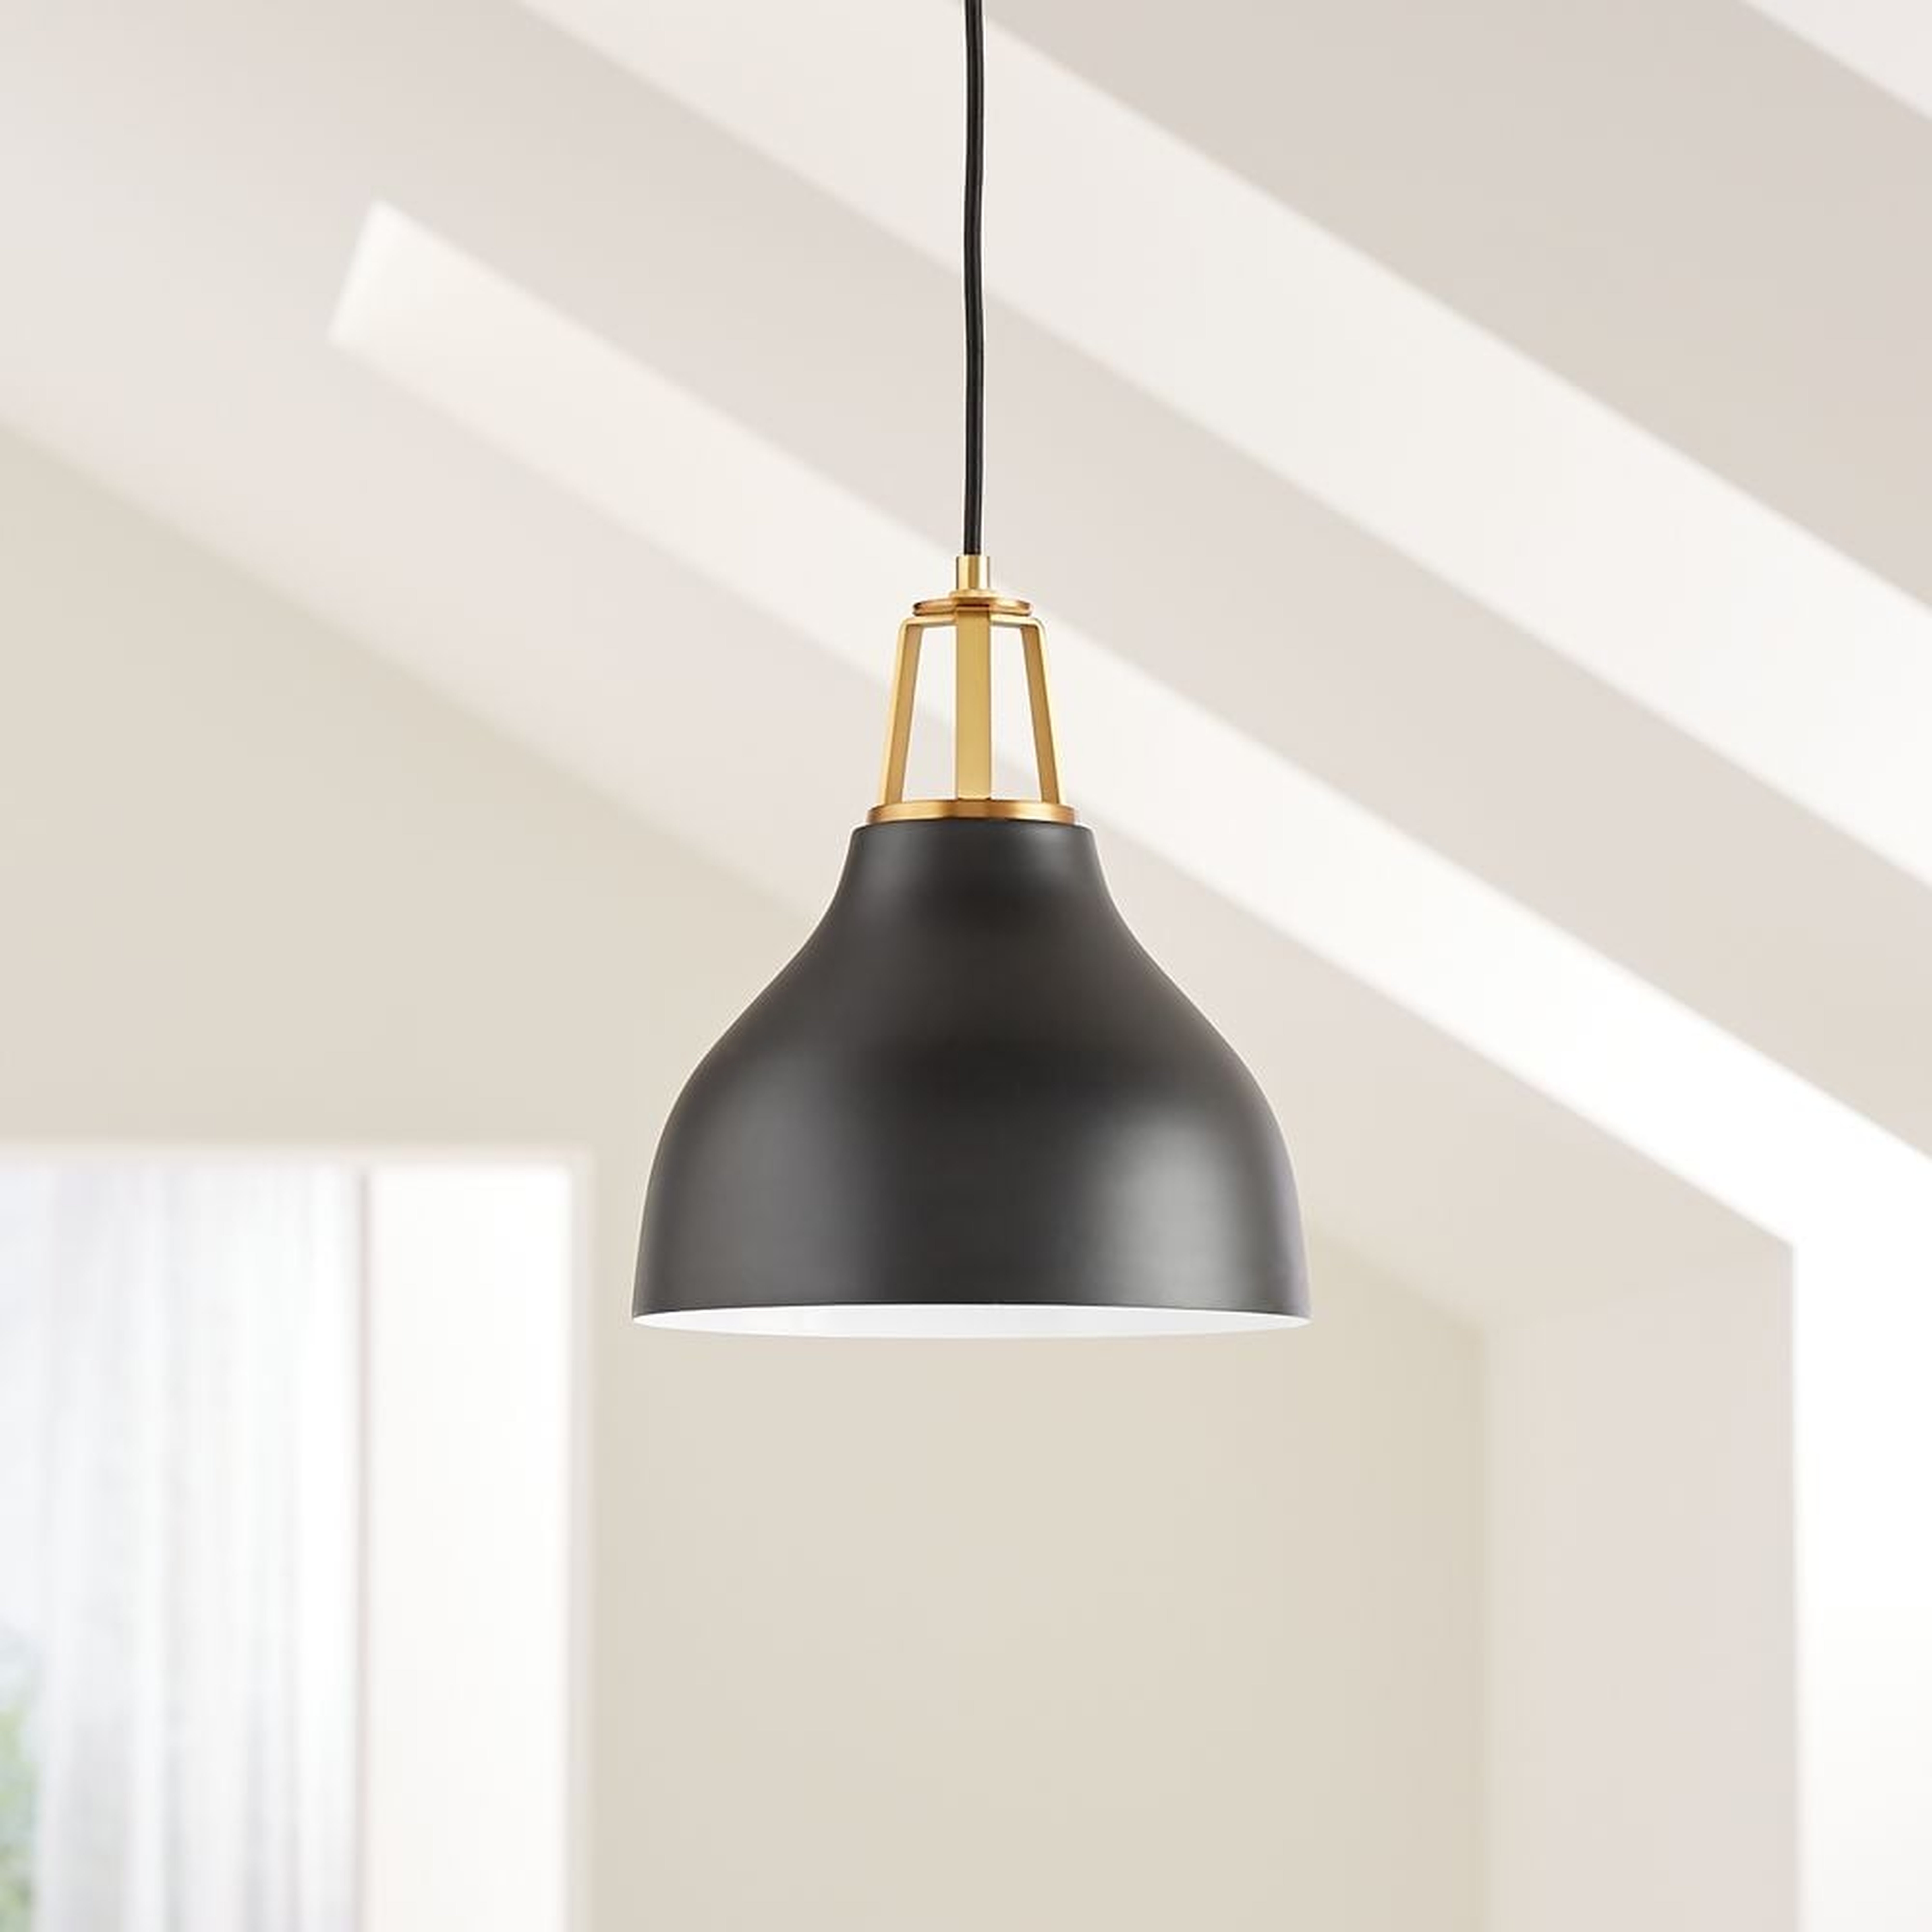 Maddox Black Bell Small Pendant Light with Brass Socket - Crate and Barrel